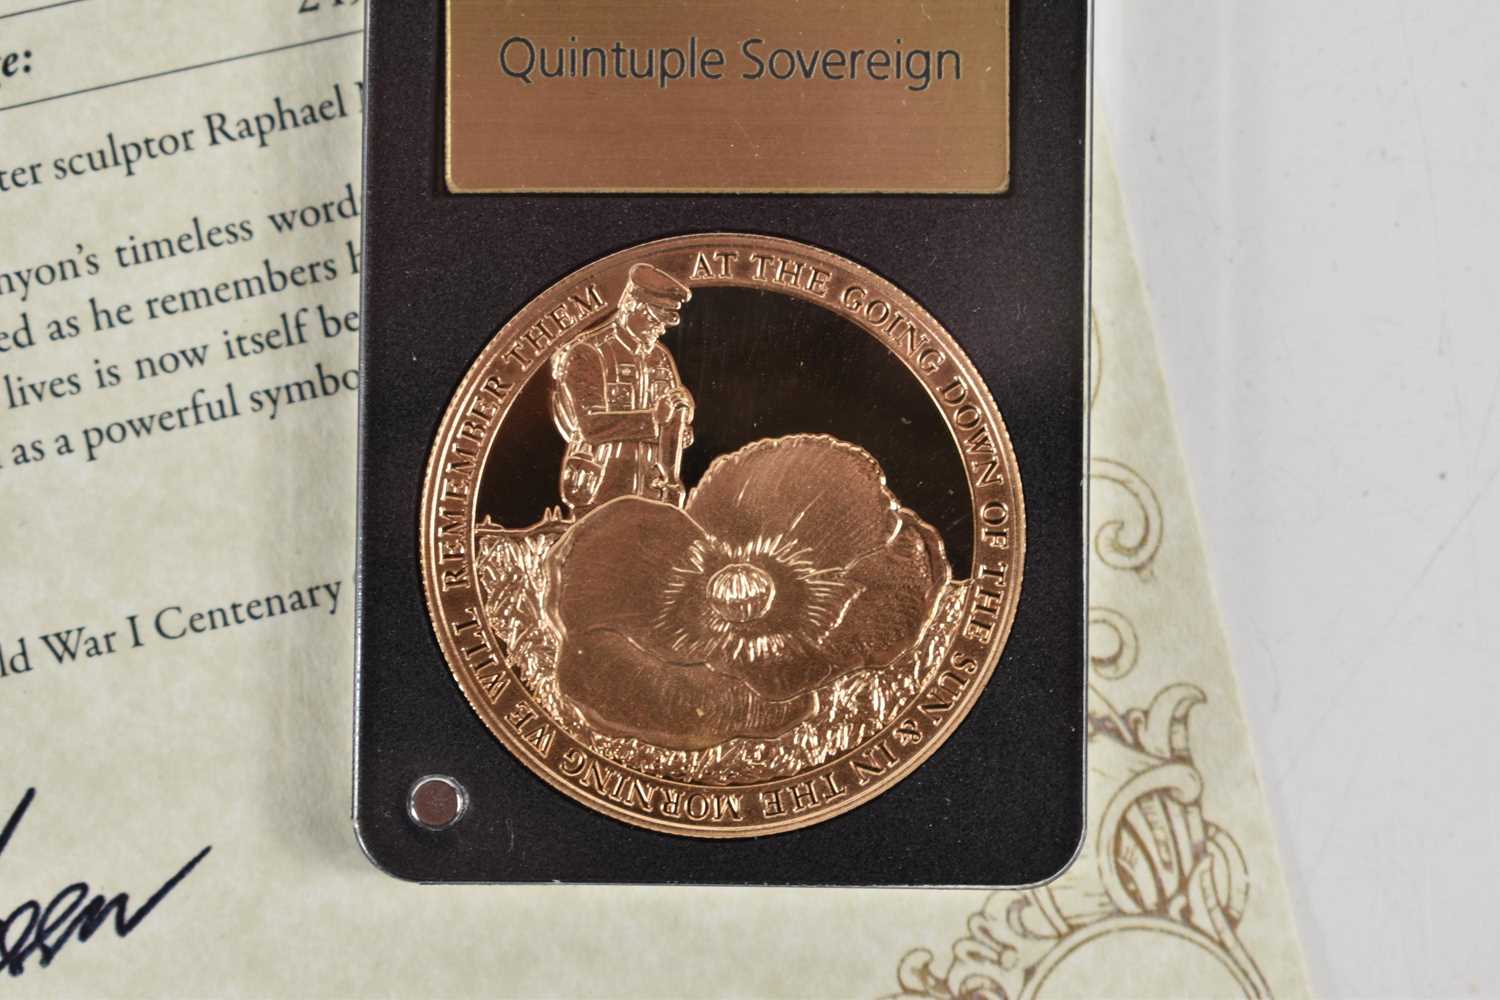 The World war I Centenary Quintuple 22ct Gold Proof Sovereign, issued by the London Mint in 2018, - Bild 3 aus 3